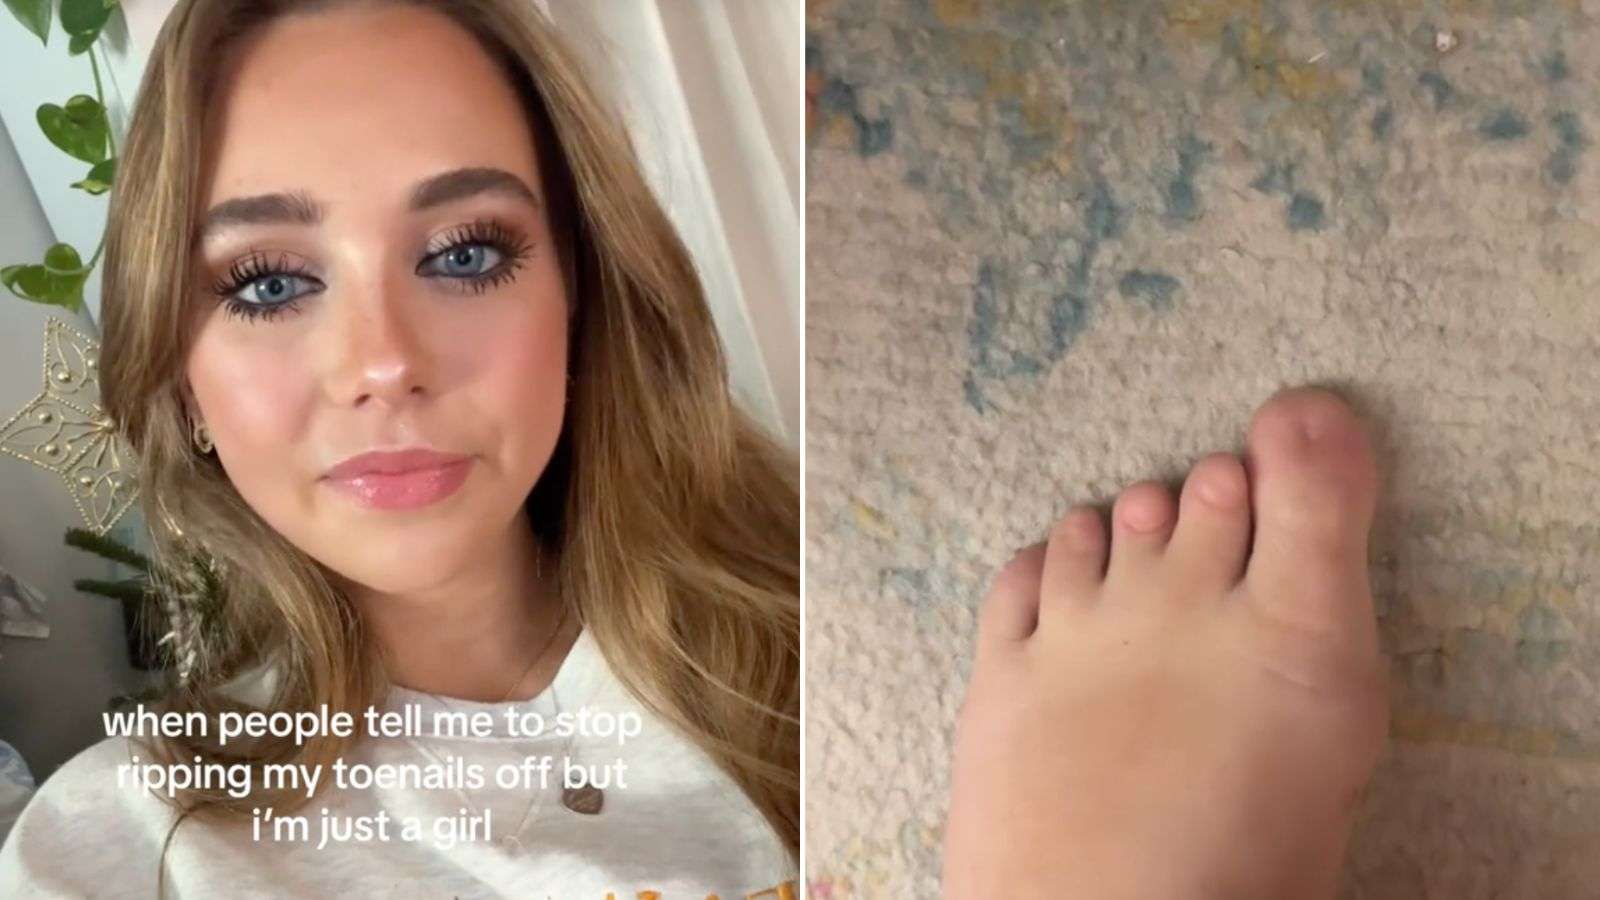 TikToker goes viral for being born without toenails